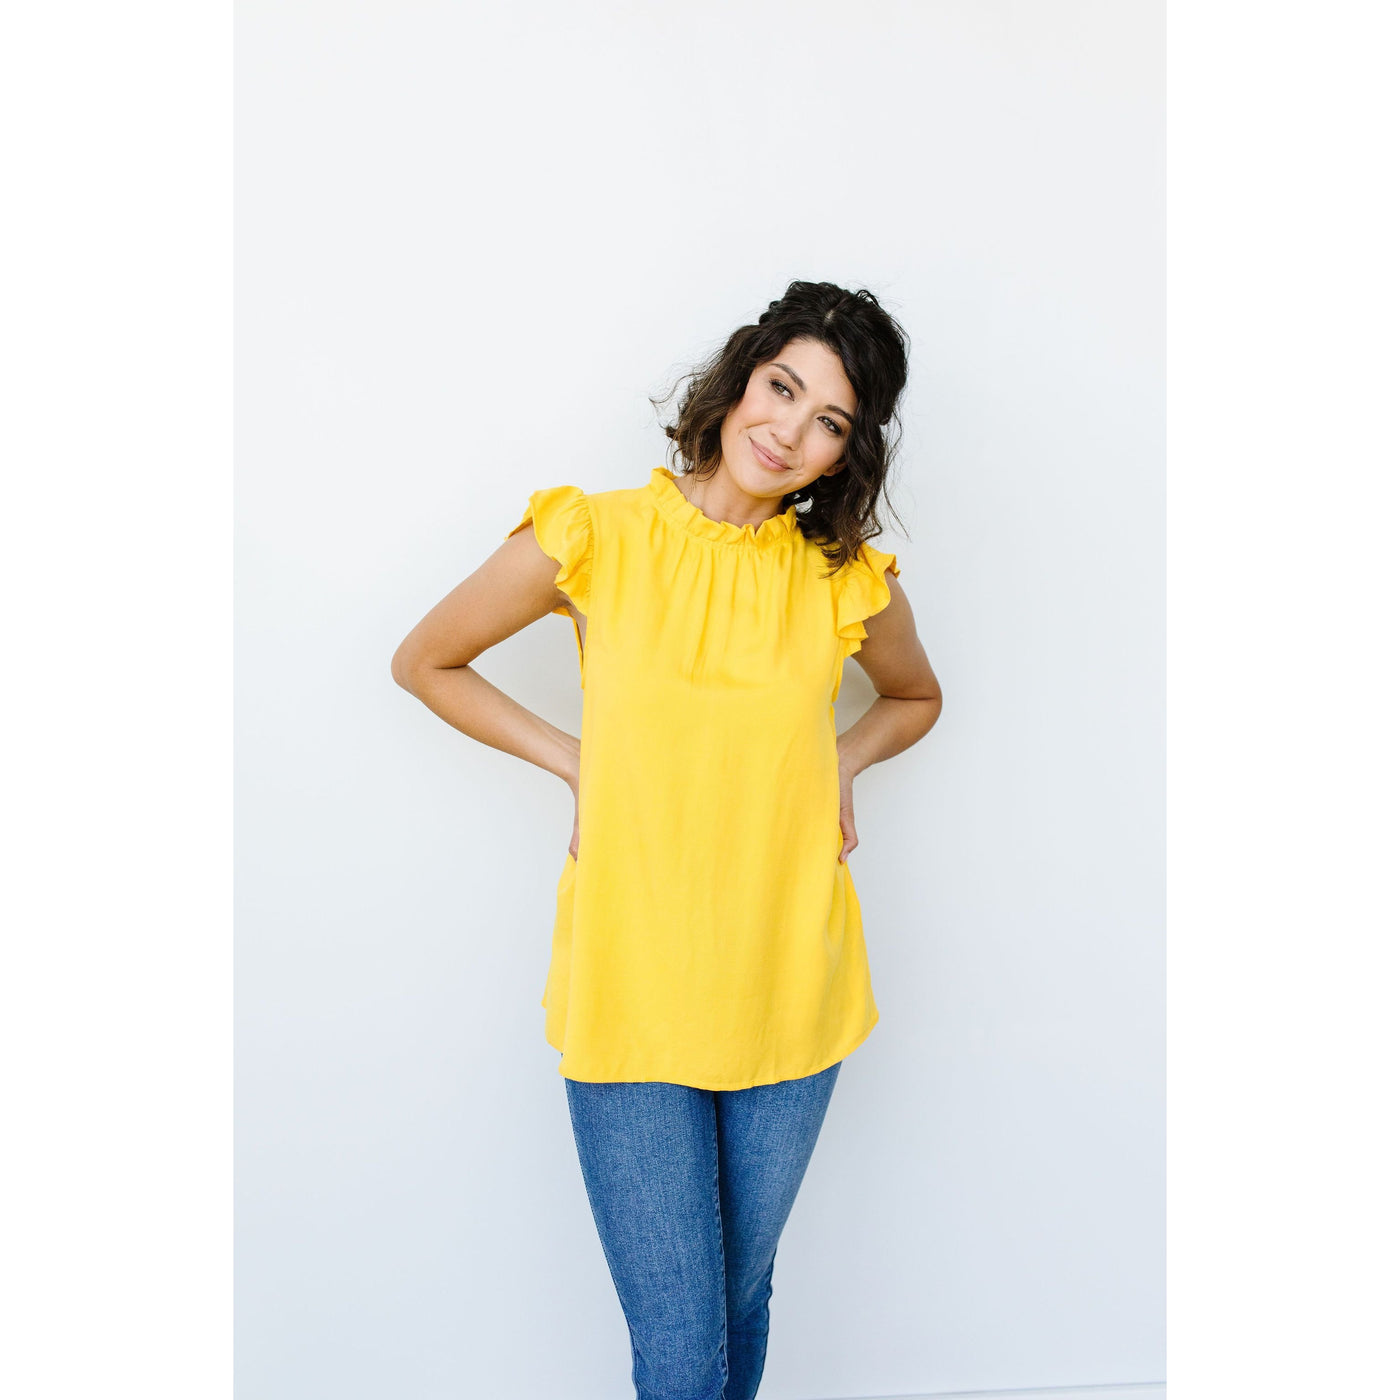 Build Me Up Buttercup Top In Yellow-W Top-Graceful & Chic Boutique, Family Clothing Store in Waxahachie, Texas